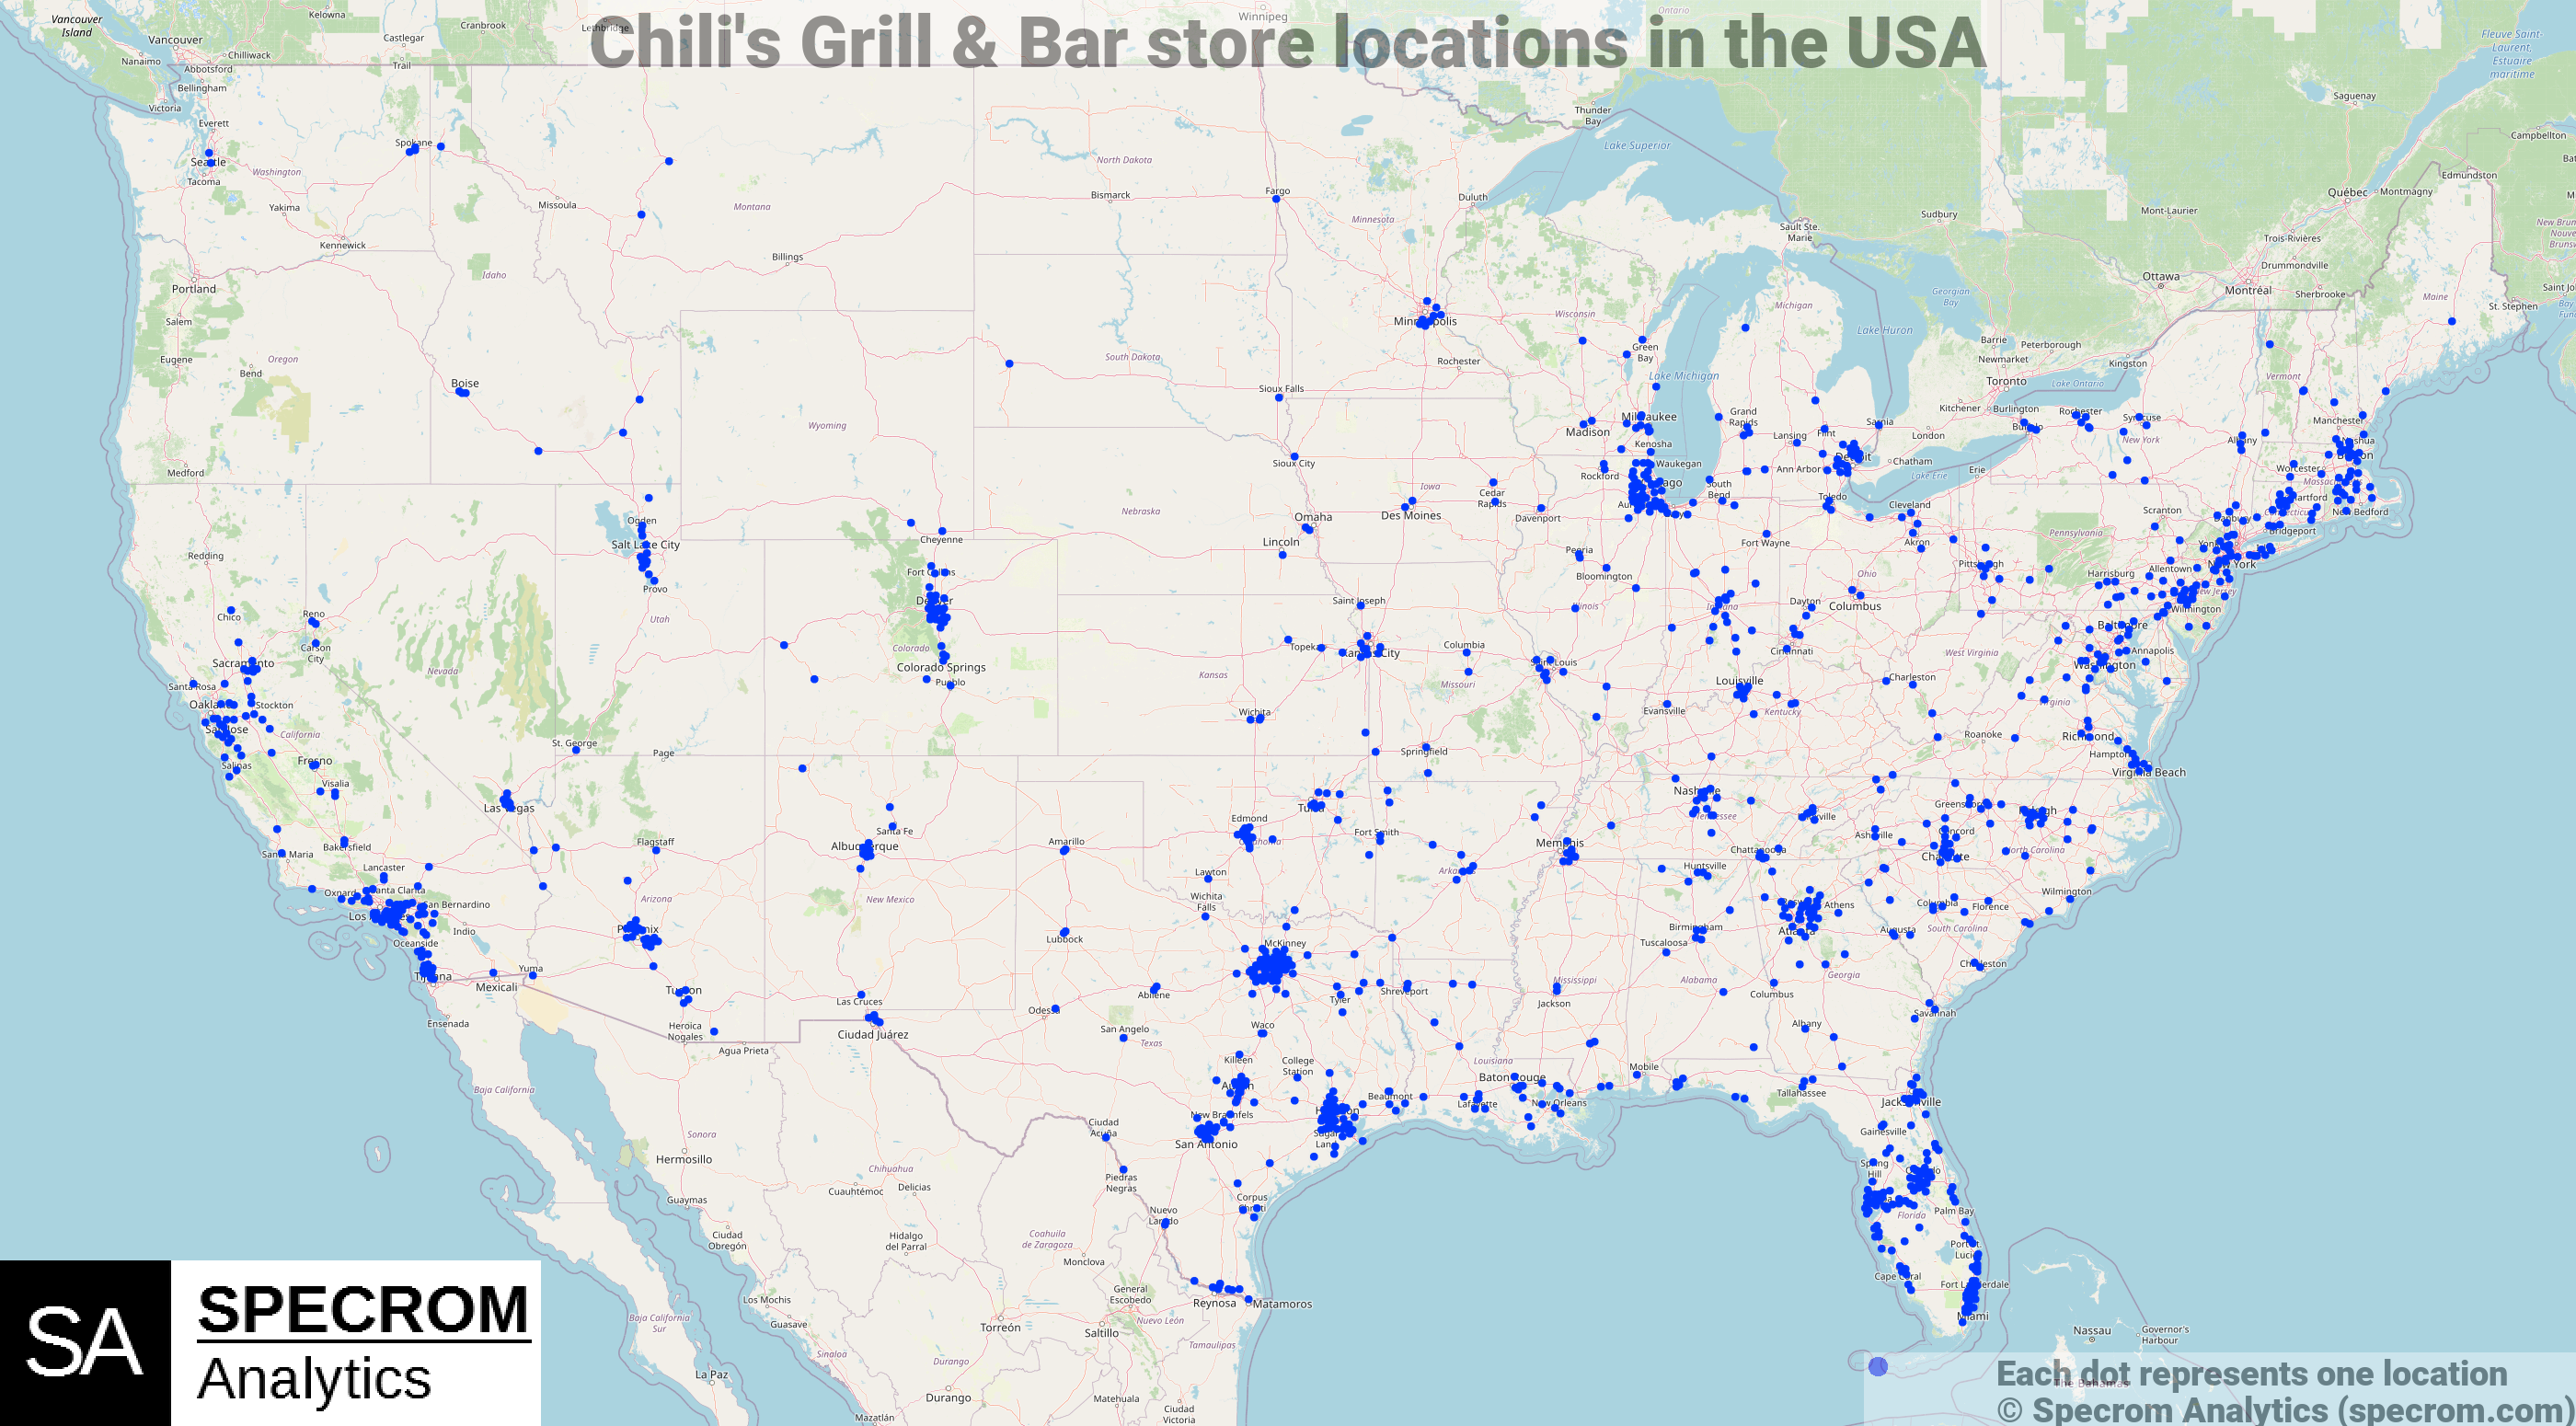 Chili's Grill & Bar store locations in the USA